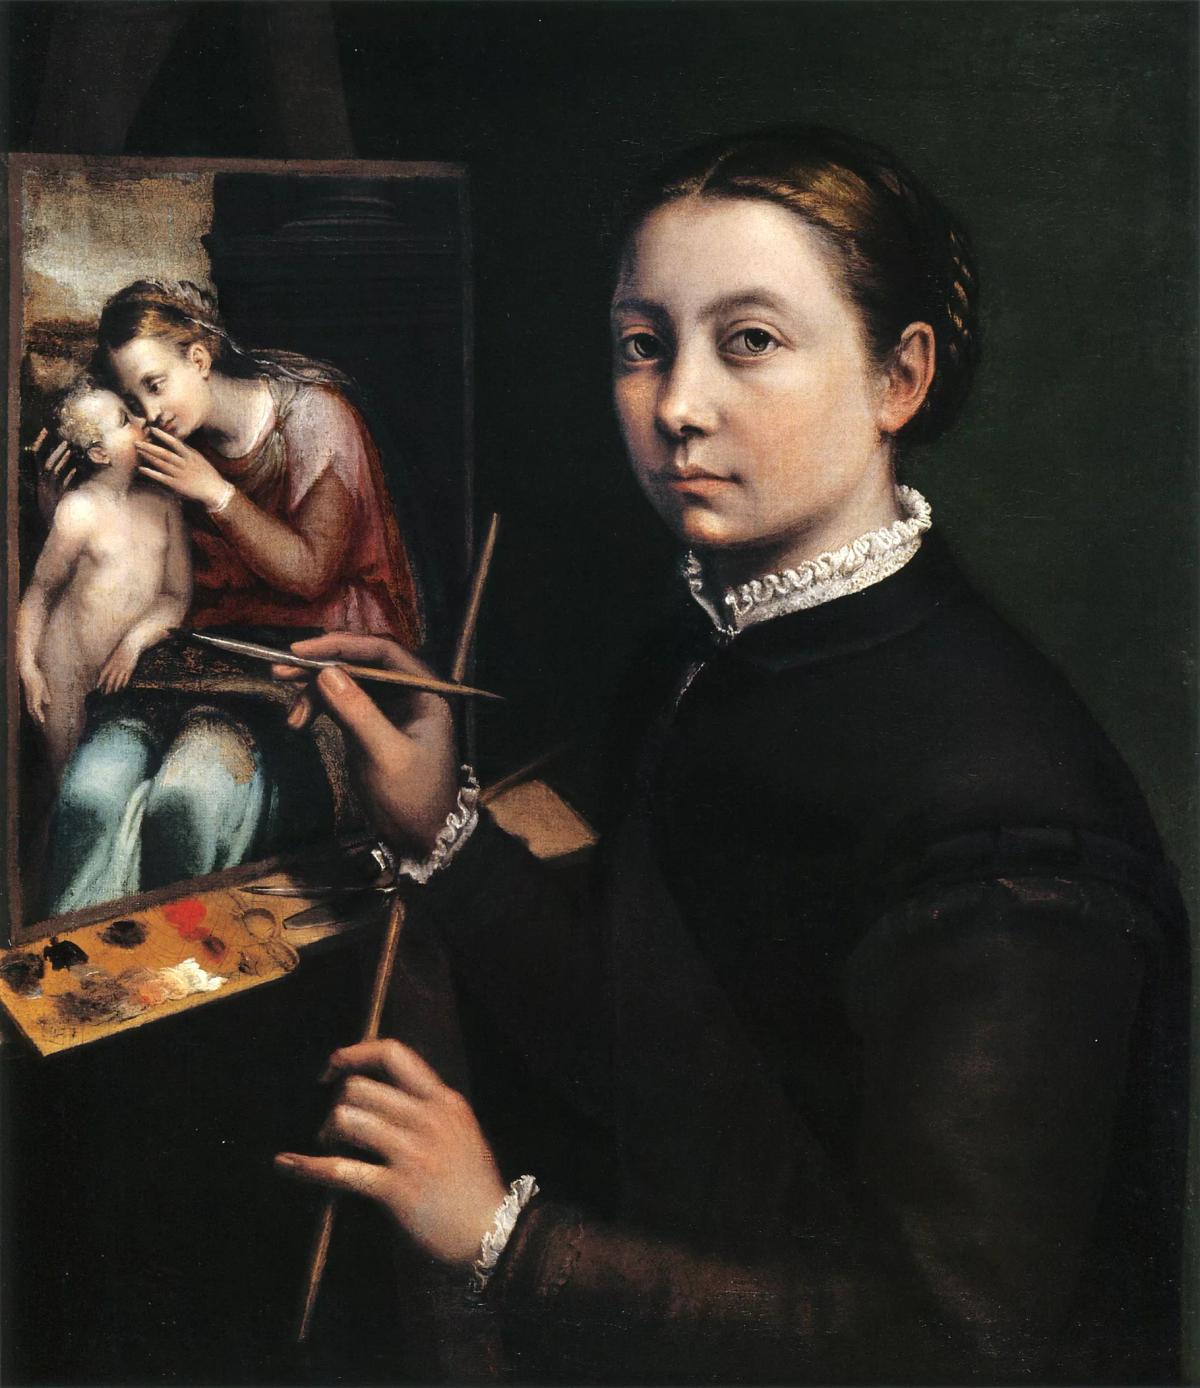 Sofonisba Anguissola's Self-portrait at the Easel Painting a Devotional Panel (1556) Image via Wikimedia Commons